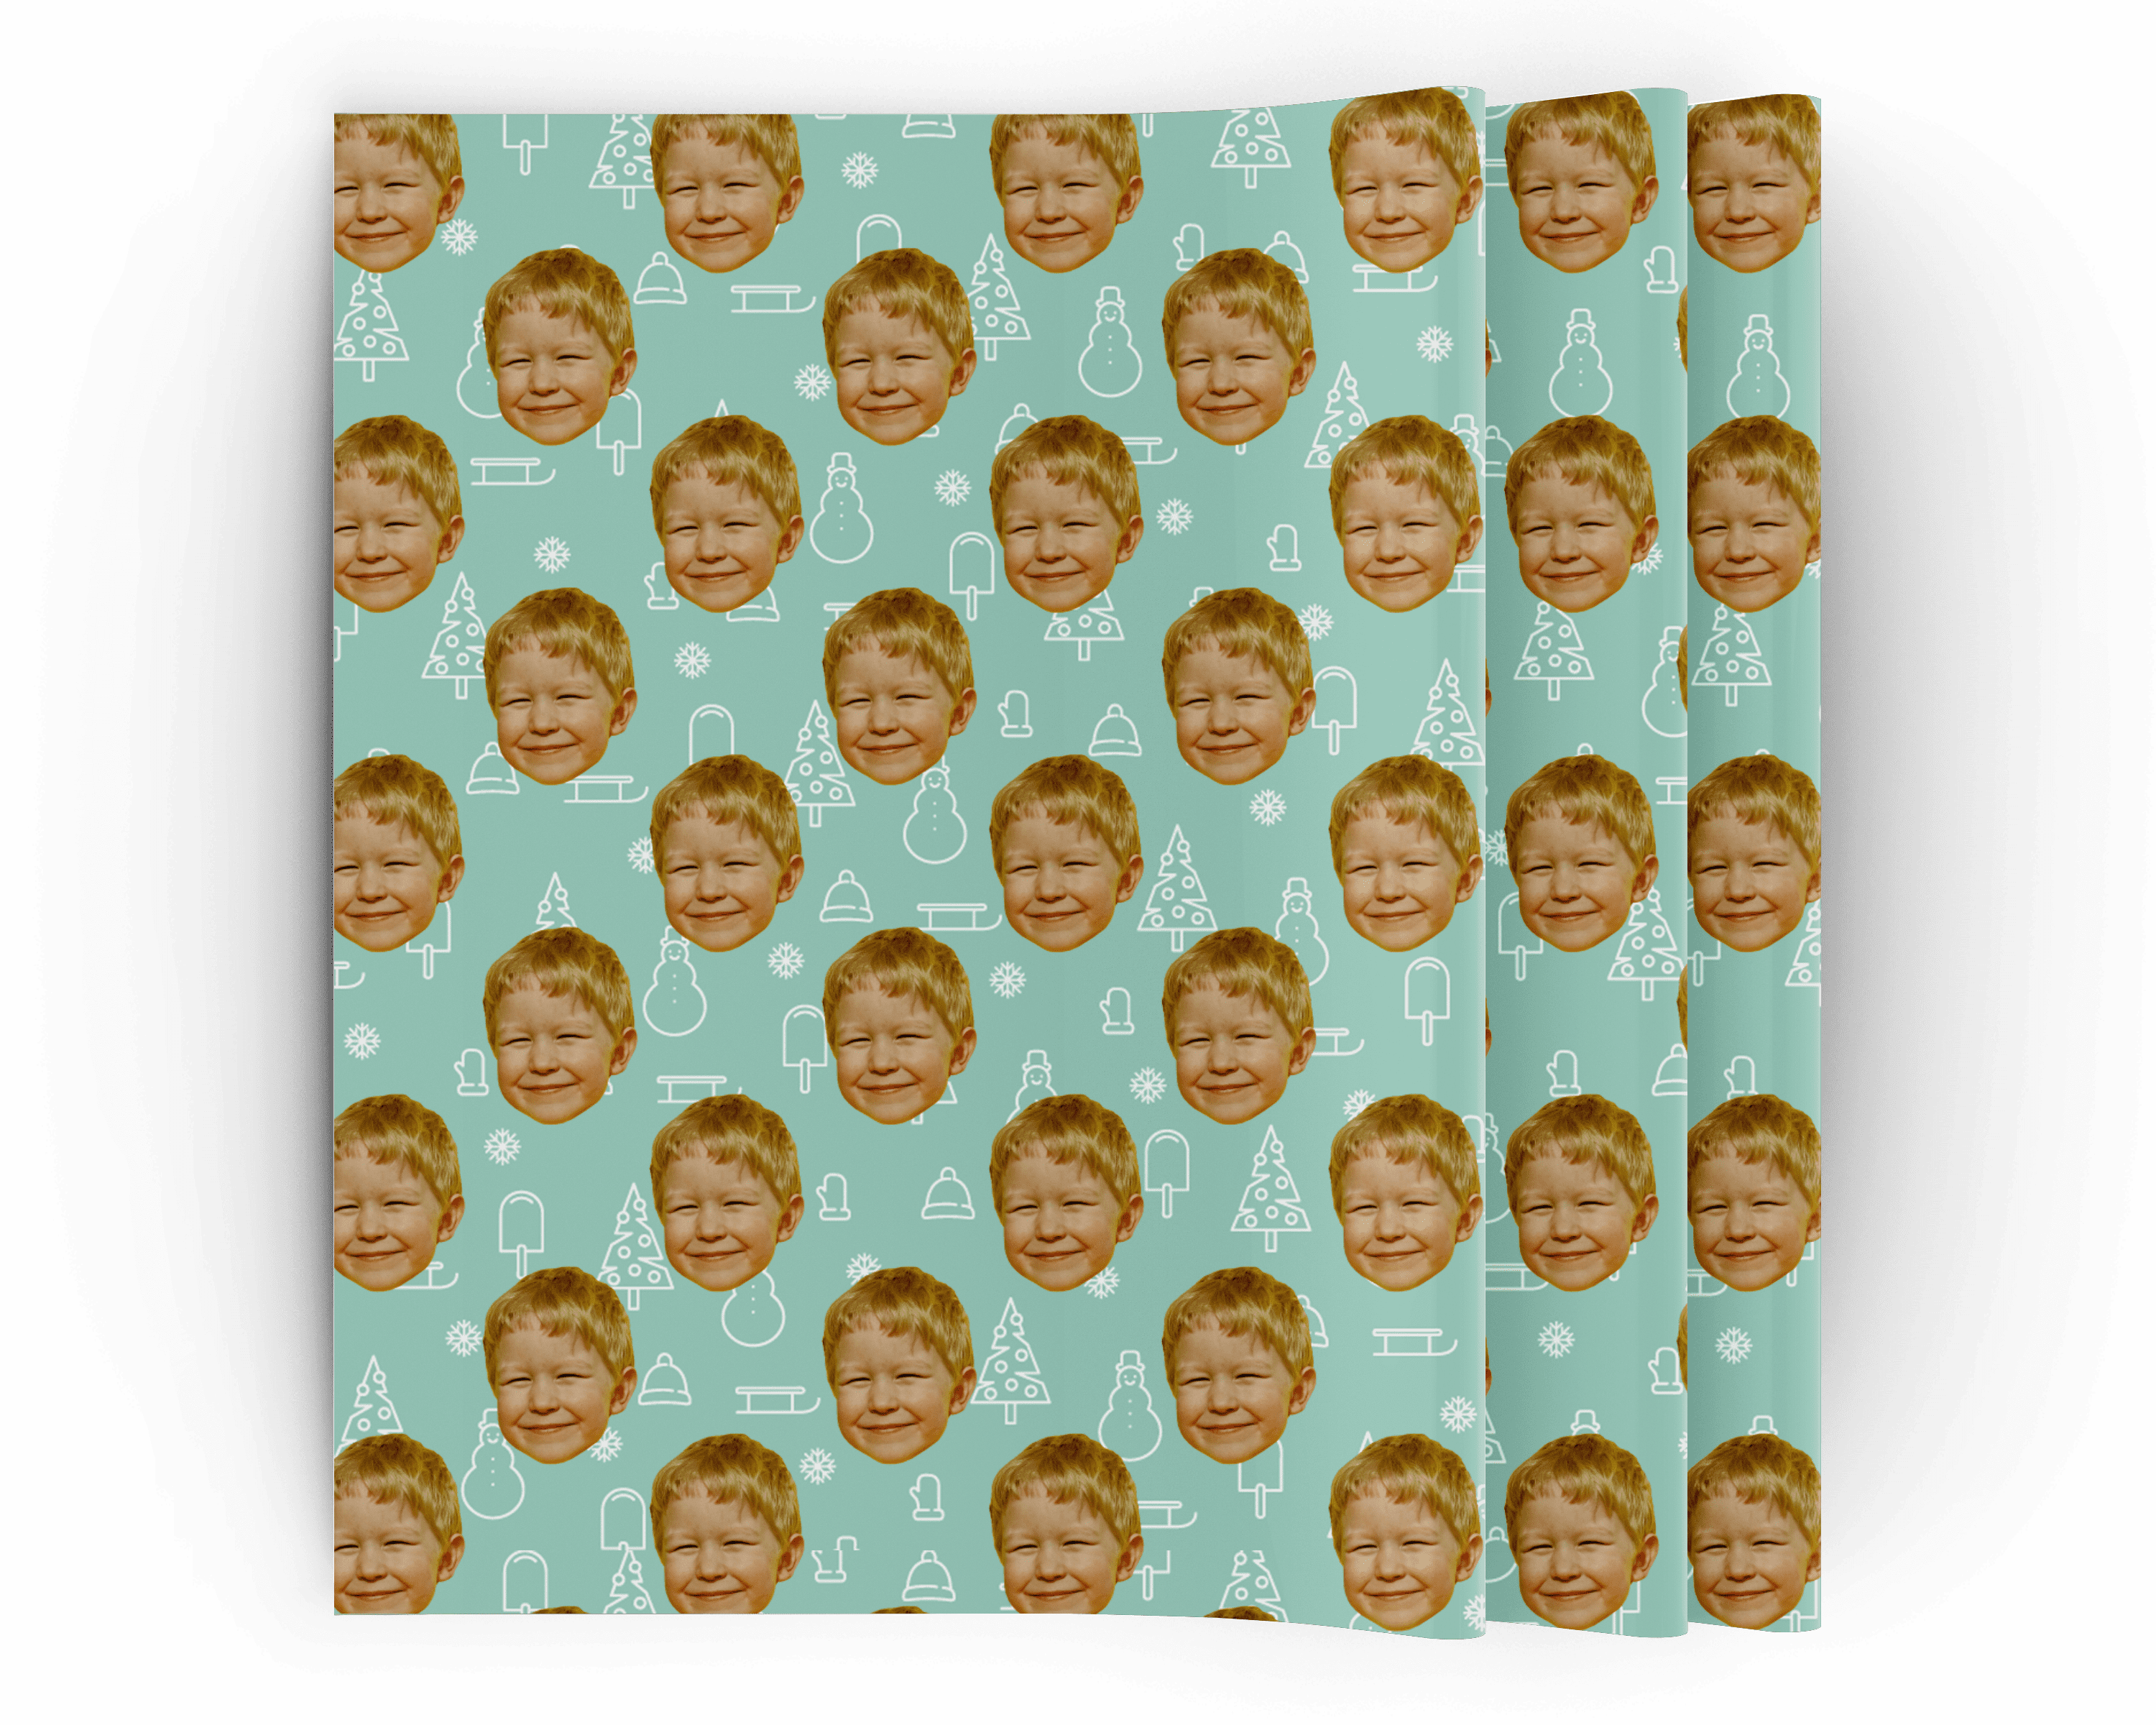 Happy Birthday Gift Wrap,great Larger Size A1 Happy Birthday Wrapping Paper  -  Israel